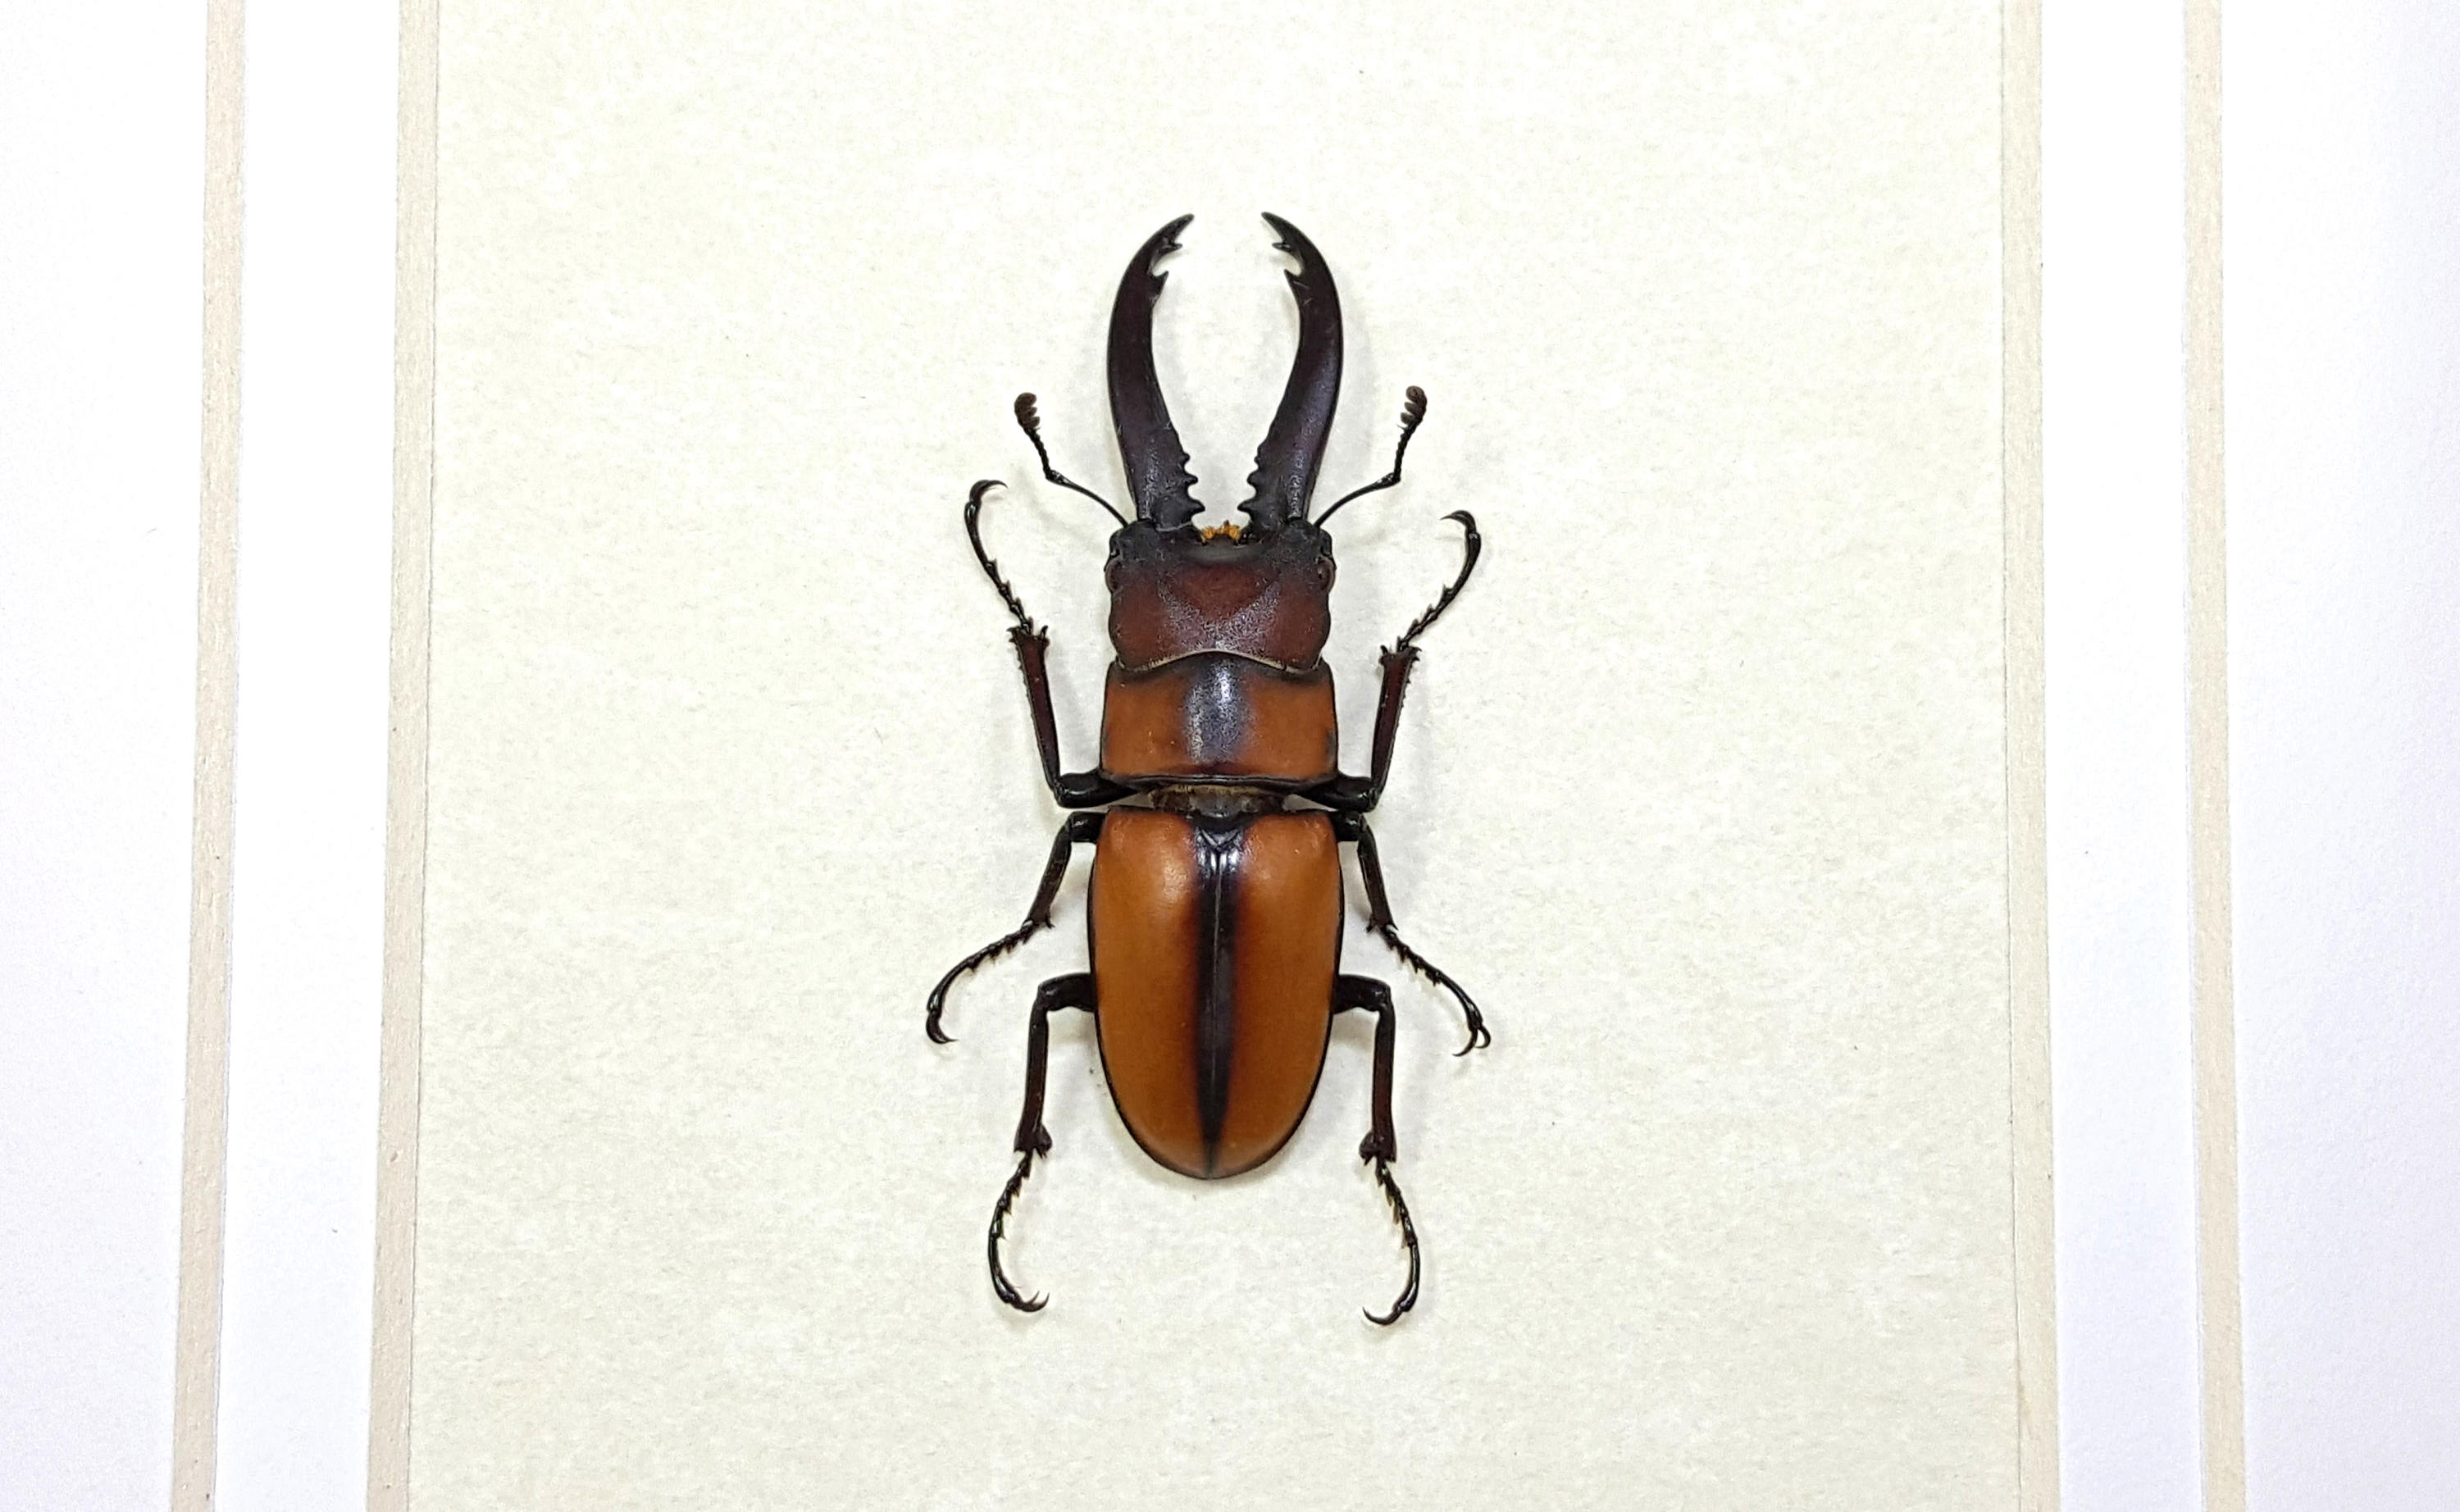 Real Framed Prosopocoilus Mohnikei Stag Beetle Taxidermy A1